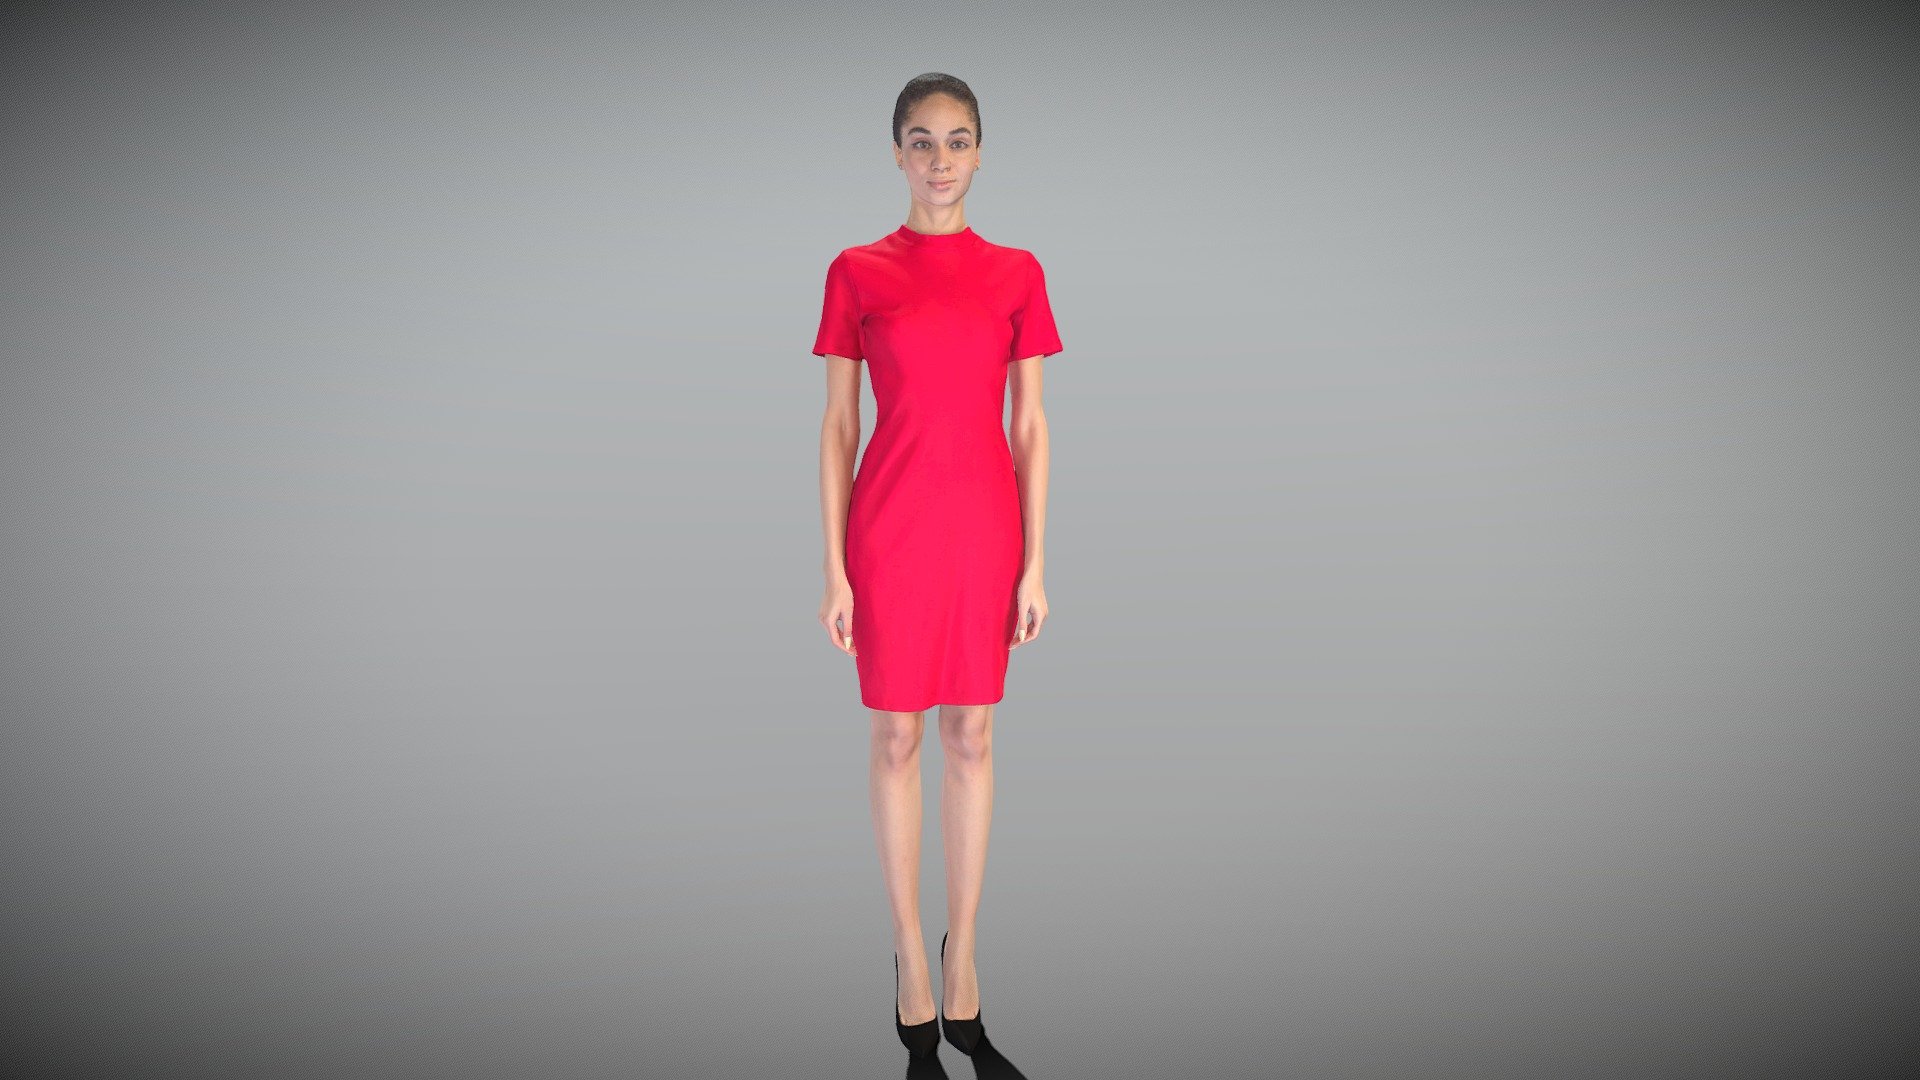 This is a true human size and detailed model of a beautiful young woman of Caucasian appearance dressed in little red dress. The model is captured in casual pose to be perfectly matching for various architectural, product visualization as a background character within urban installations, city designs, outdoor design presentations, VR/AR content, etc.

Technical specifications:




digital double 3d scan model

150k &amp; 30k triangles | double triangulated

high-poly model (.ztl tool with 5 subdivisions) clean and retopologized automatically via ZRemesher

sufficiently clean

PBR textures 8K resolution: Diffuse, Normal, Specular maps

non-overlapping UV map

no extra plugins are required for this model

Download package includes a Cinema 4D project file with Redshift shader, OBJ, FBX, STL files, which are applicable for 3ds Max, Maya, Unreal Engine, Unity, Blender, etc. All the textures you will find in the “Tex” folder, included into the main archive.

3D EVERYTHING

Stand with Ukraine! - Woman in red dress 377 - Buy Royalty Free 3D model by deep3dstudio 3d model